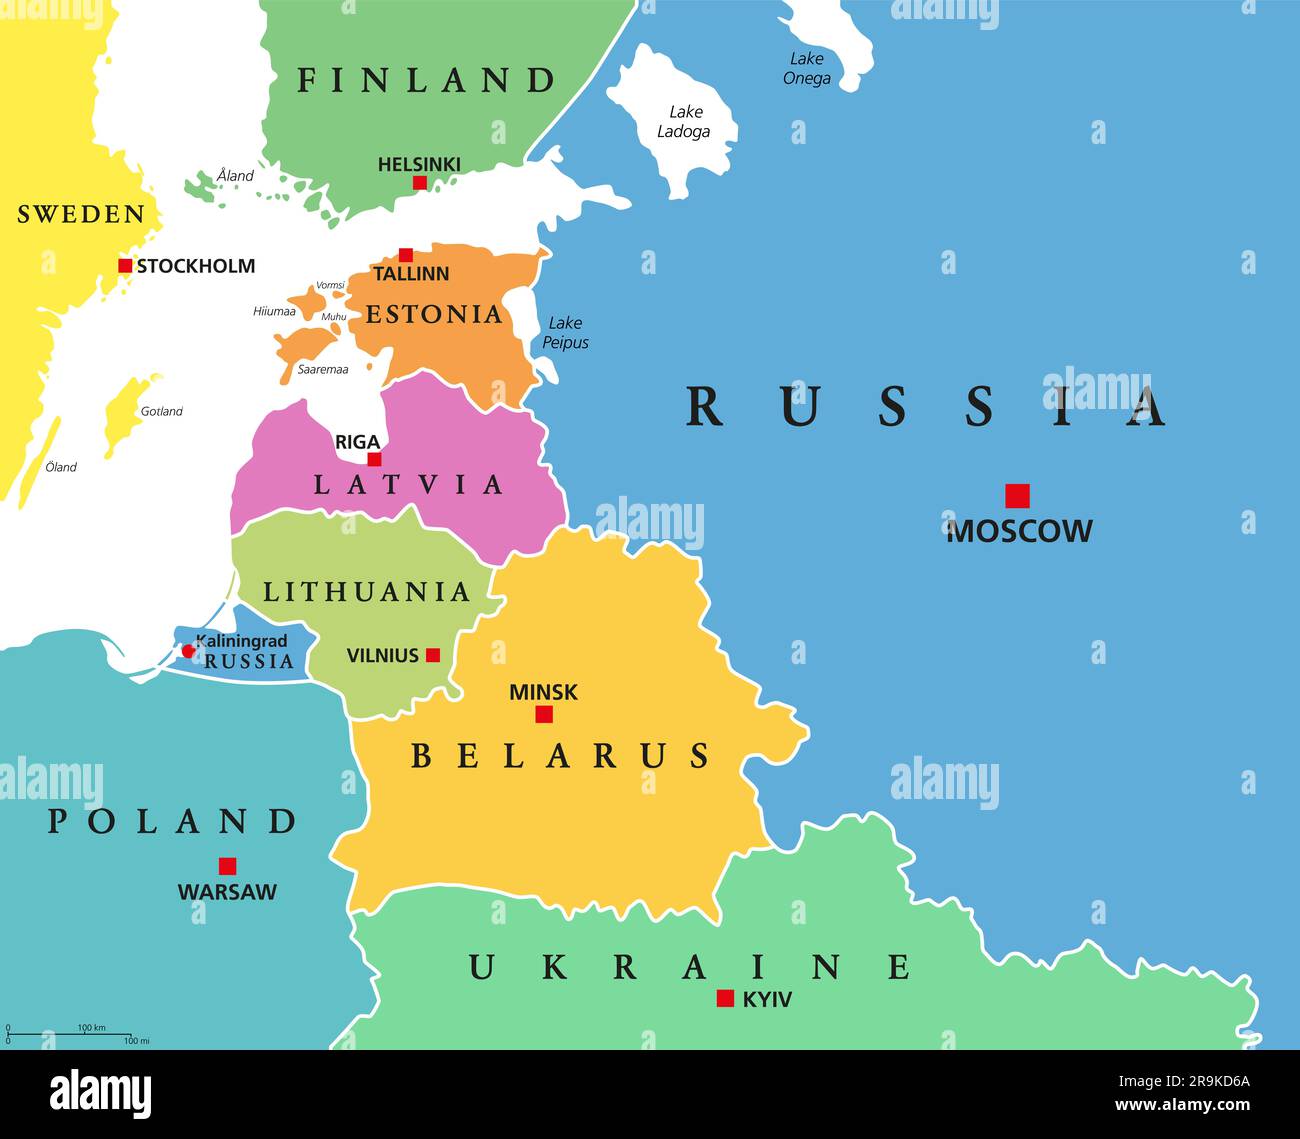 Baltic States, colored countries, political map. From Finland to Estonia, Latvia and Lithuania to Poland, and from the Kaliningrad to Belarus. Stock Photo